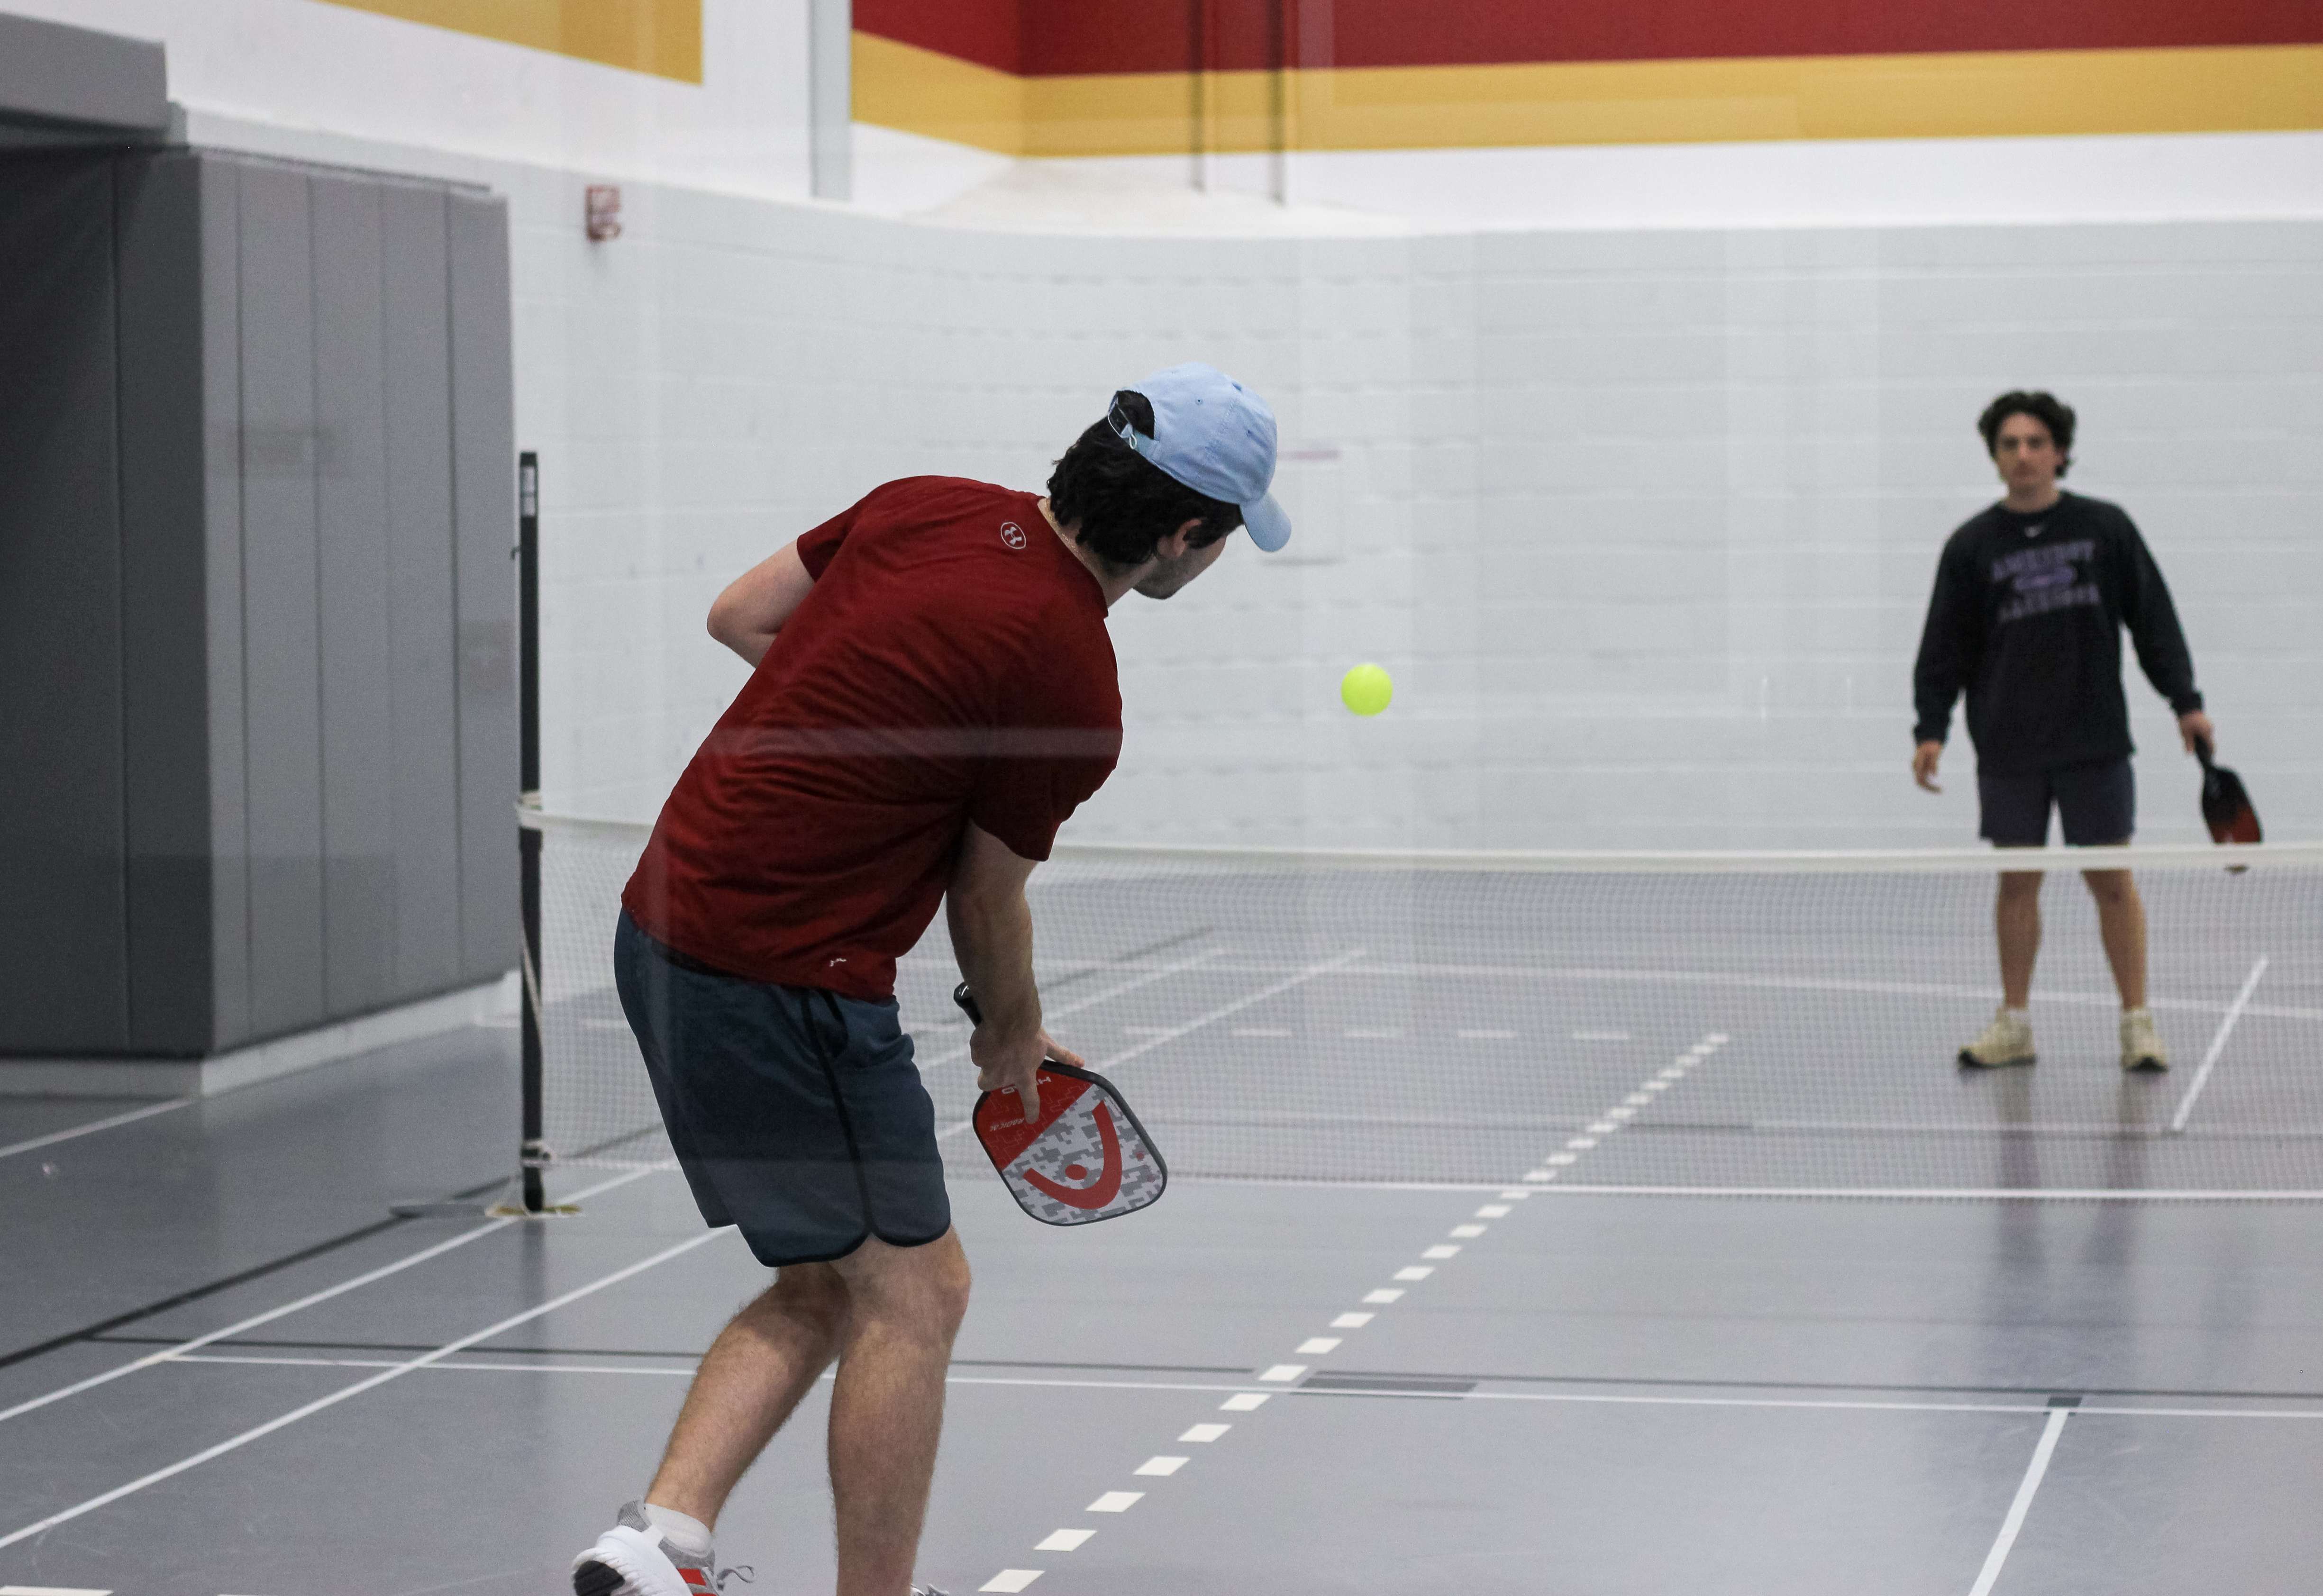 Action shot of two students playing intramural pickleball.